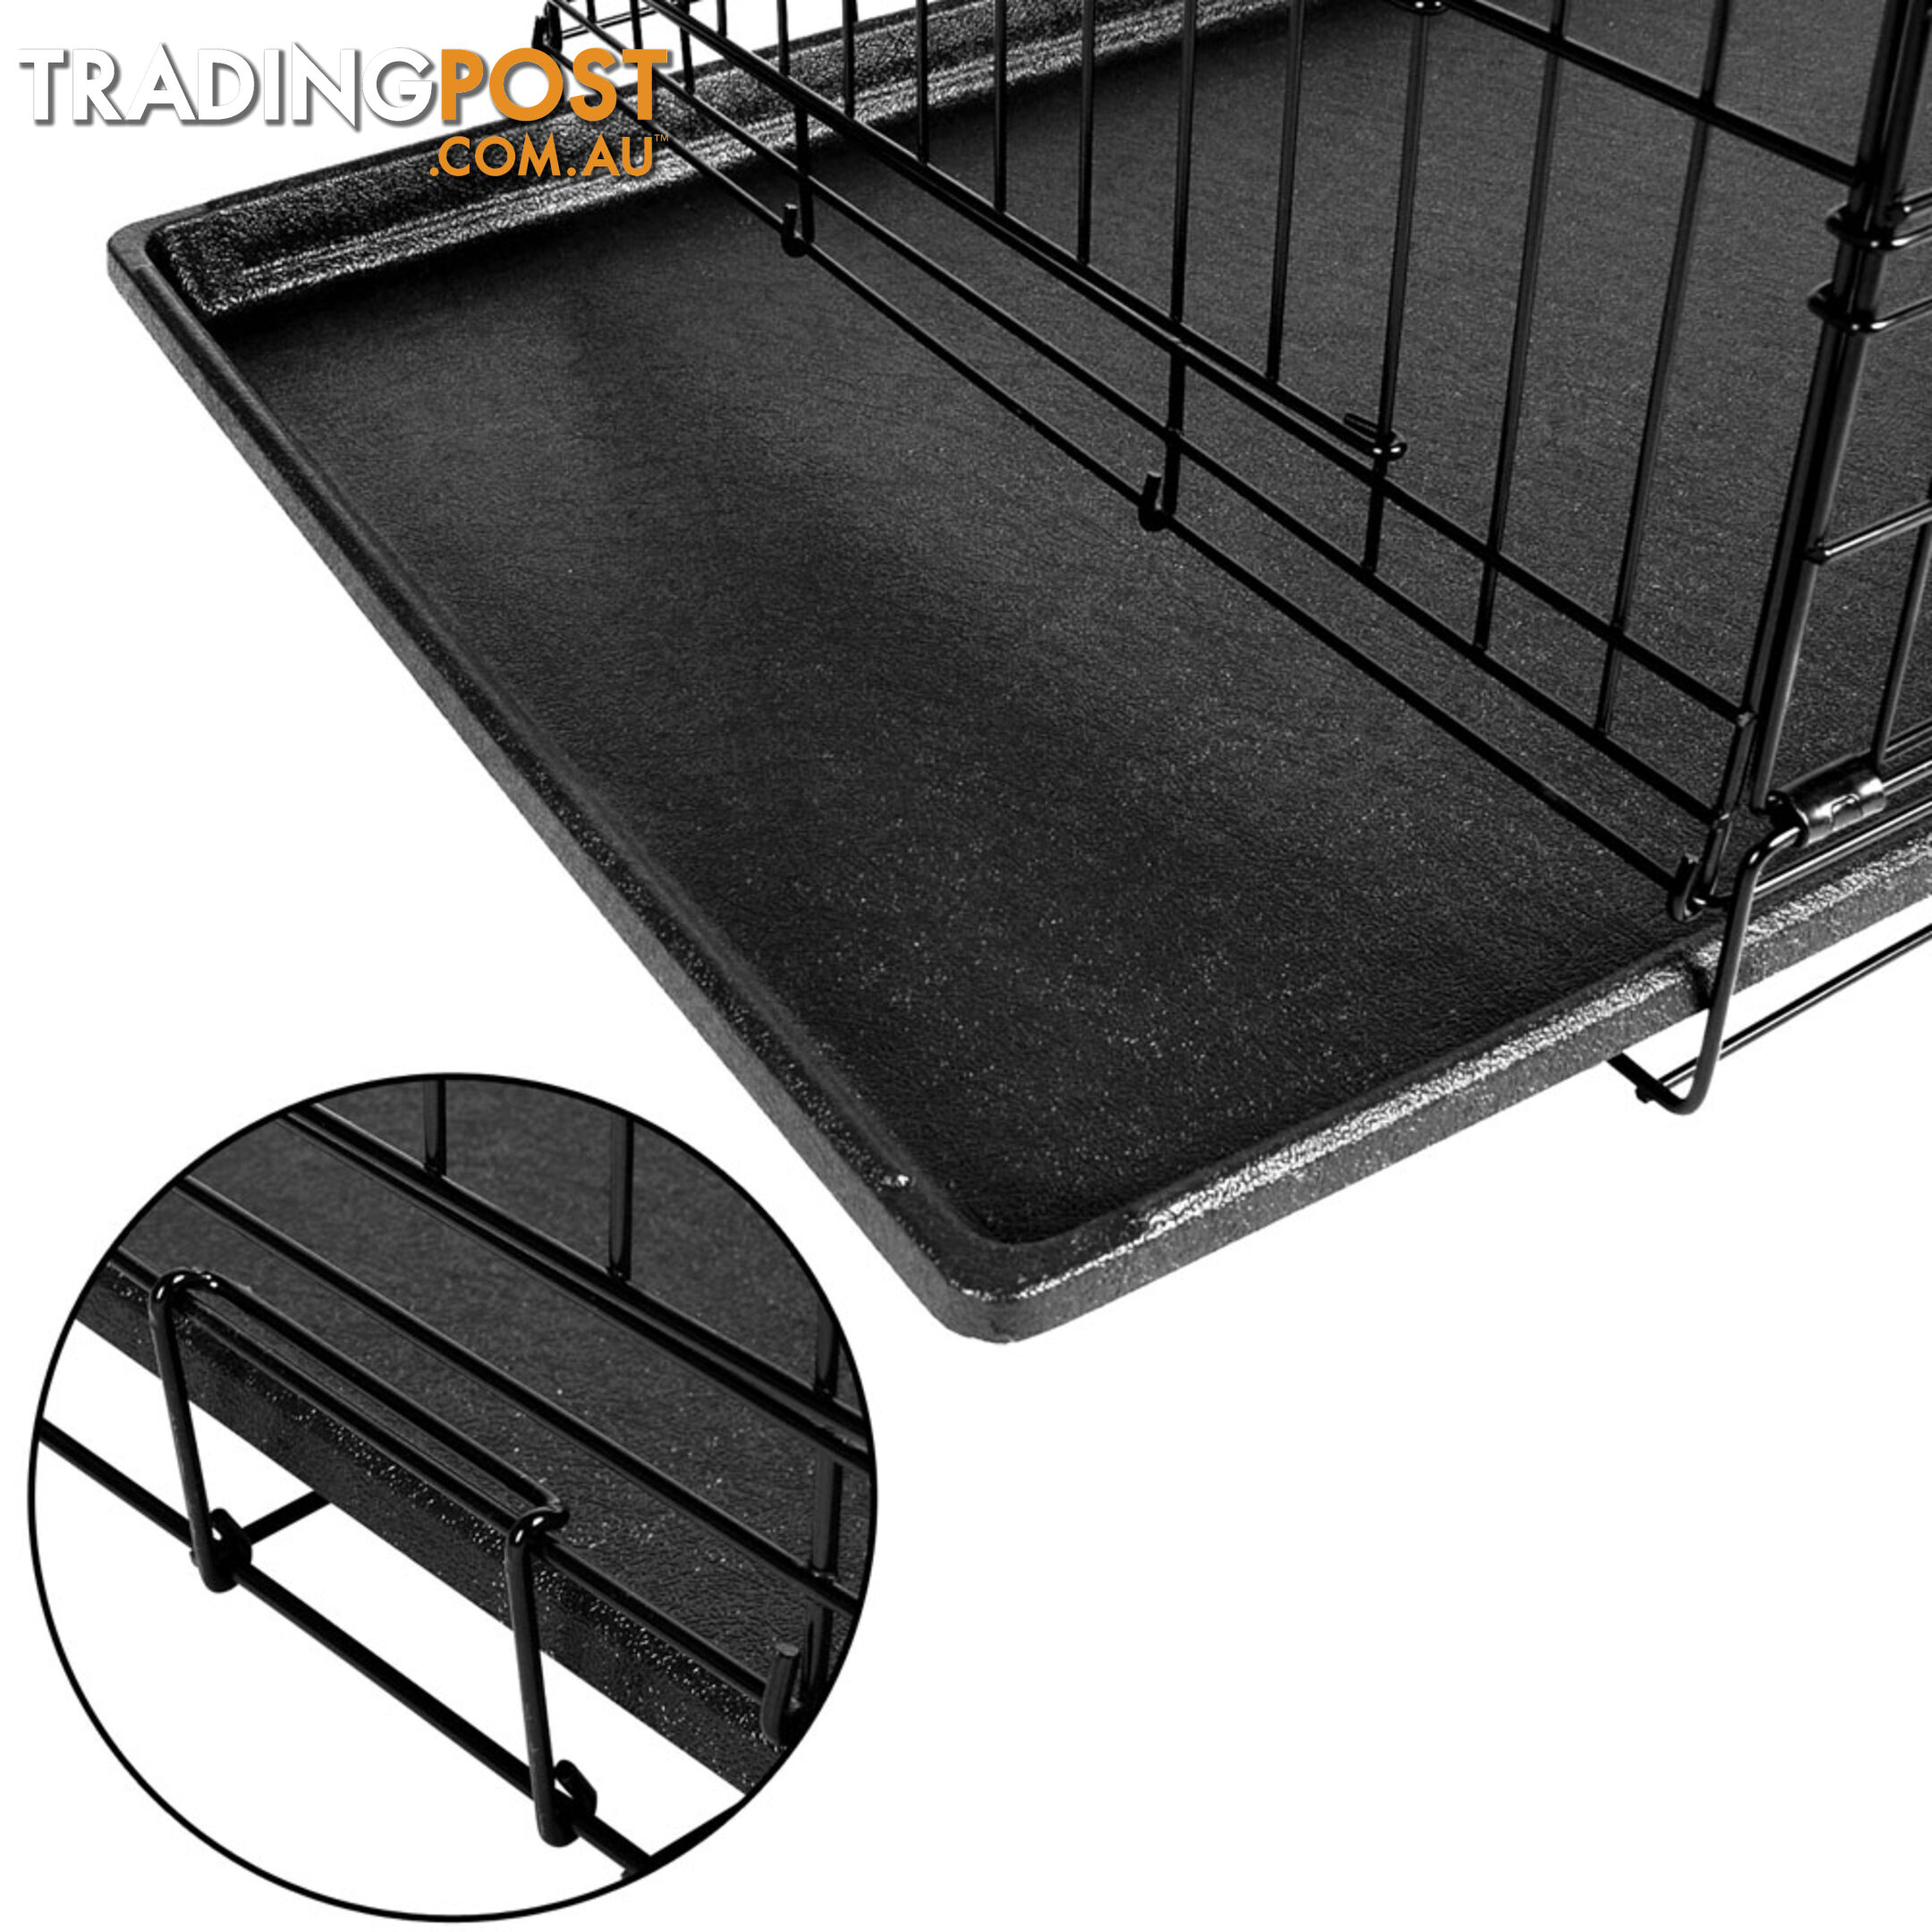 Metal Collapsible Dog Cage 48IN